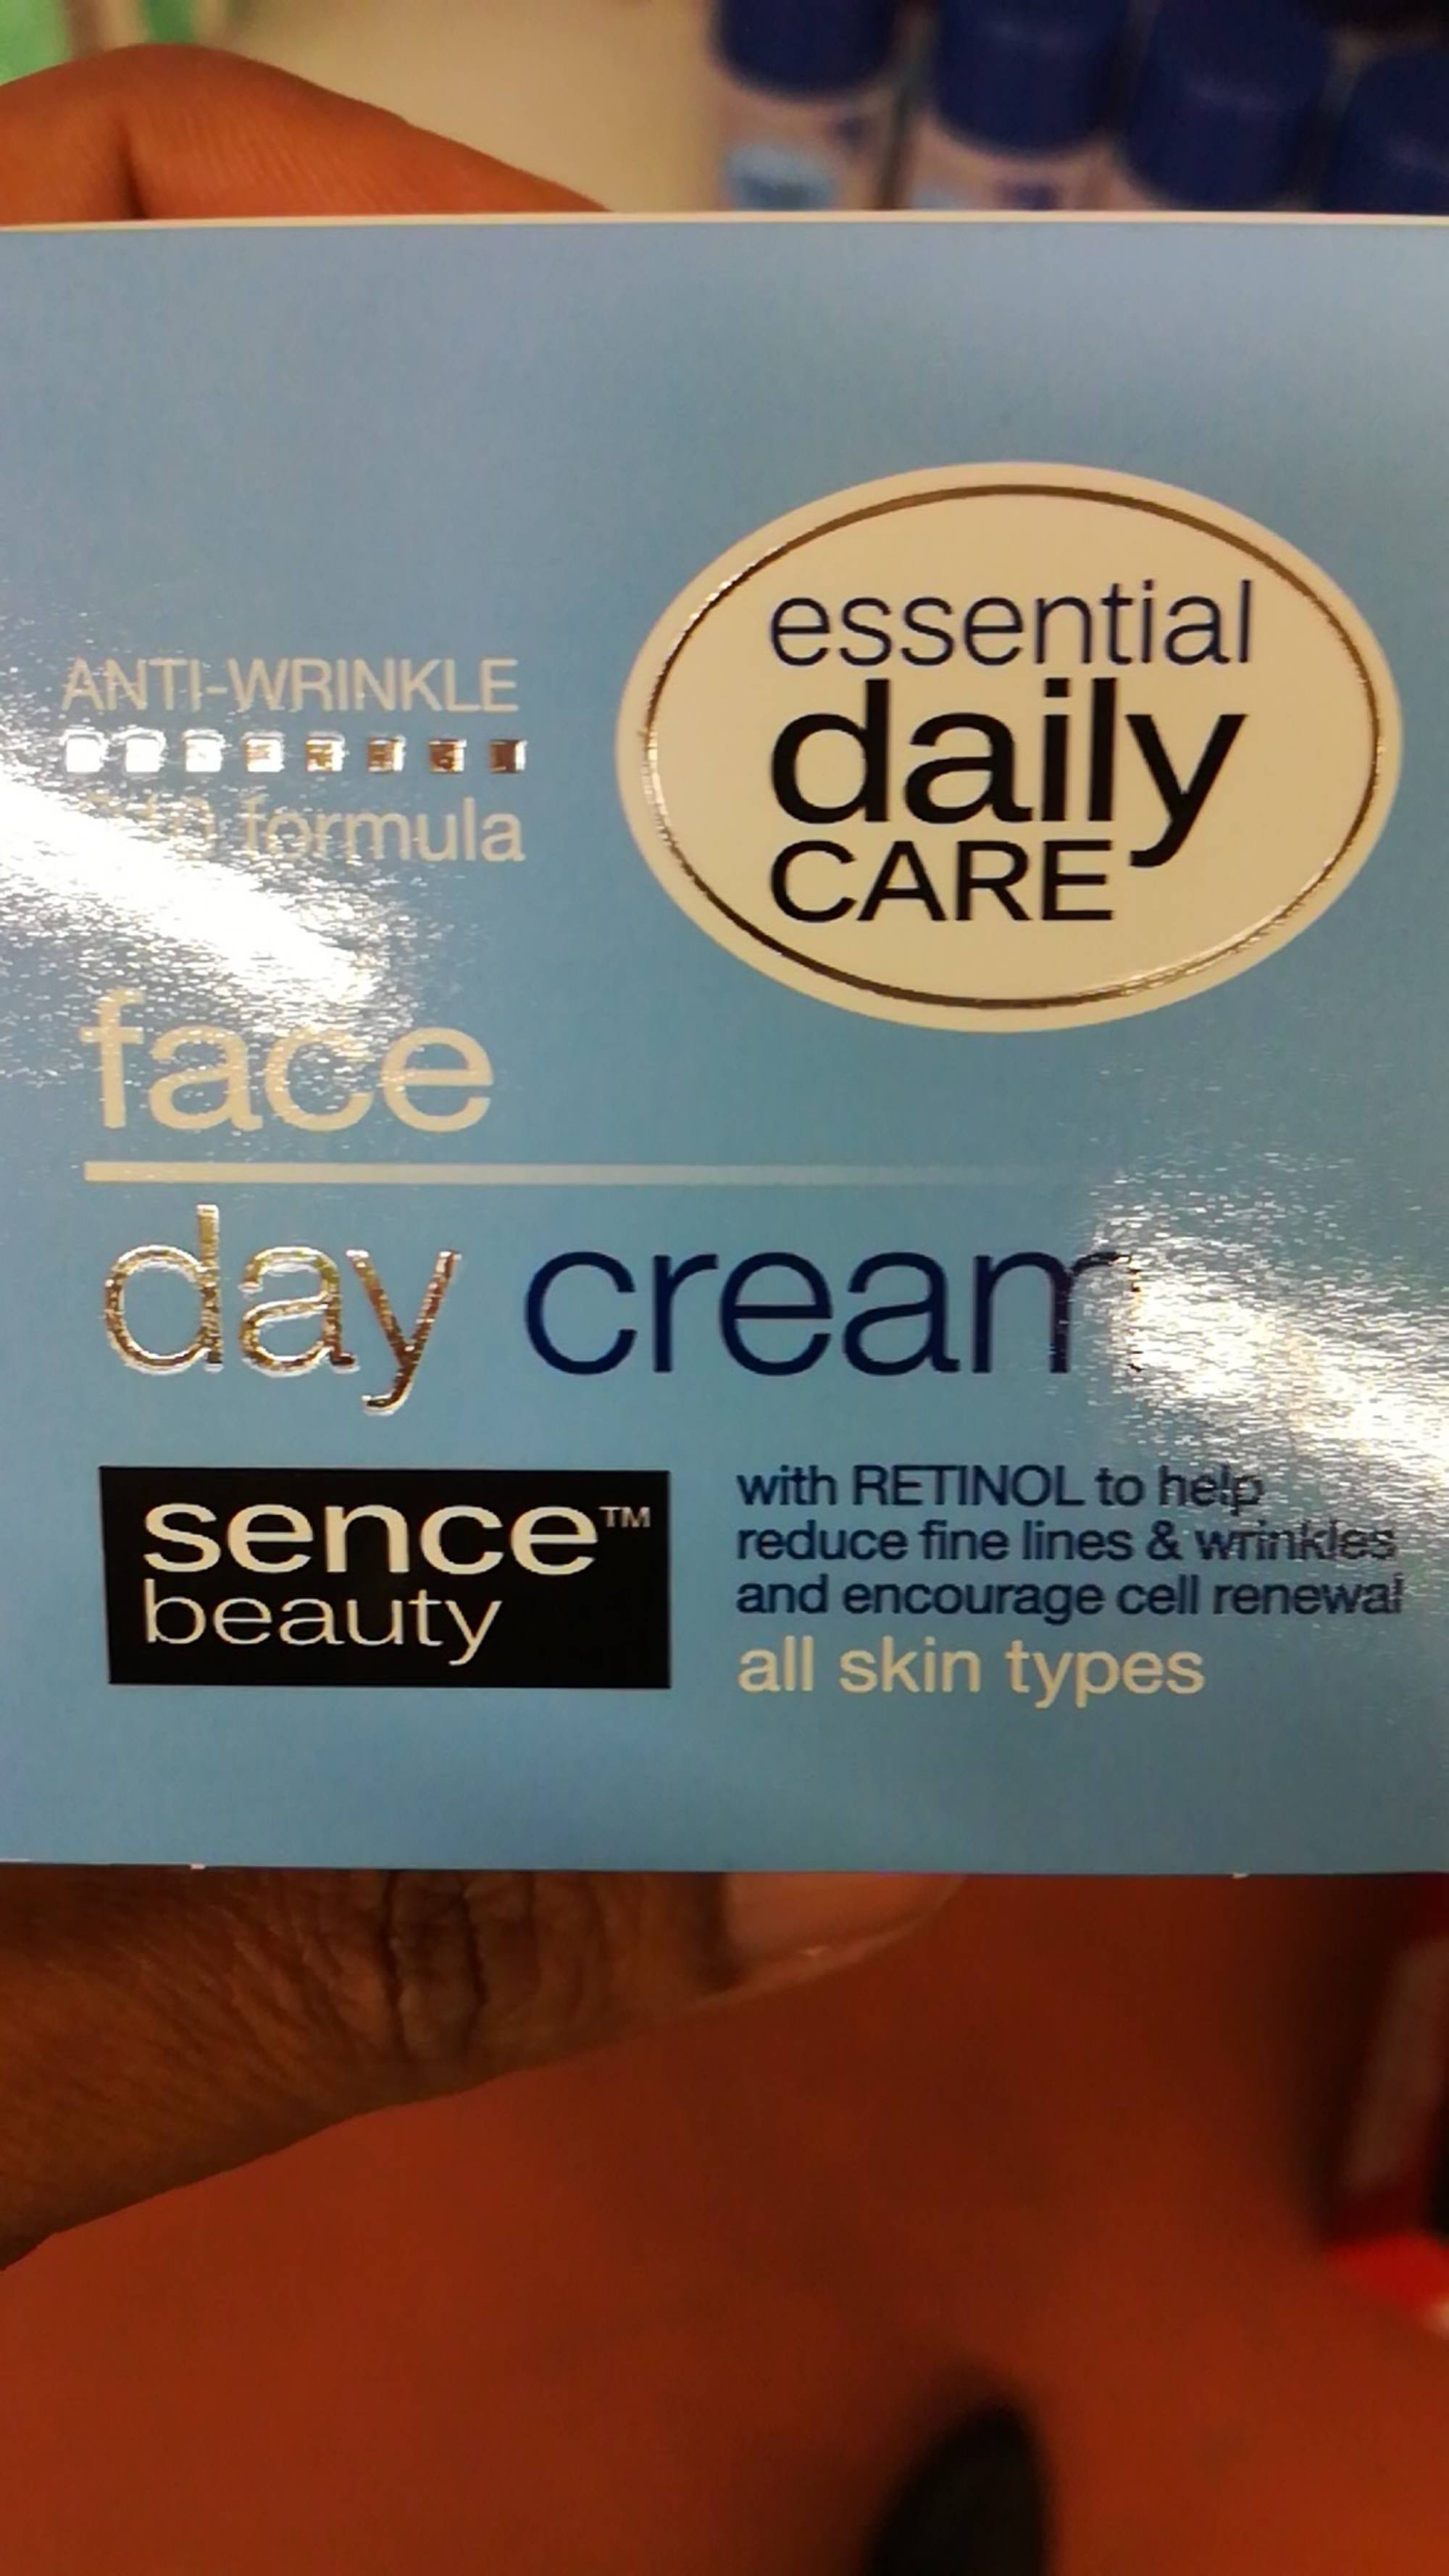 SENS BEAUTY - Essential daily care - Day cream Anti-wrinkle